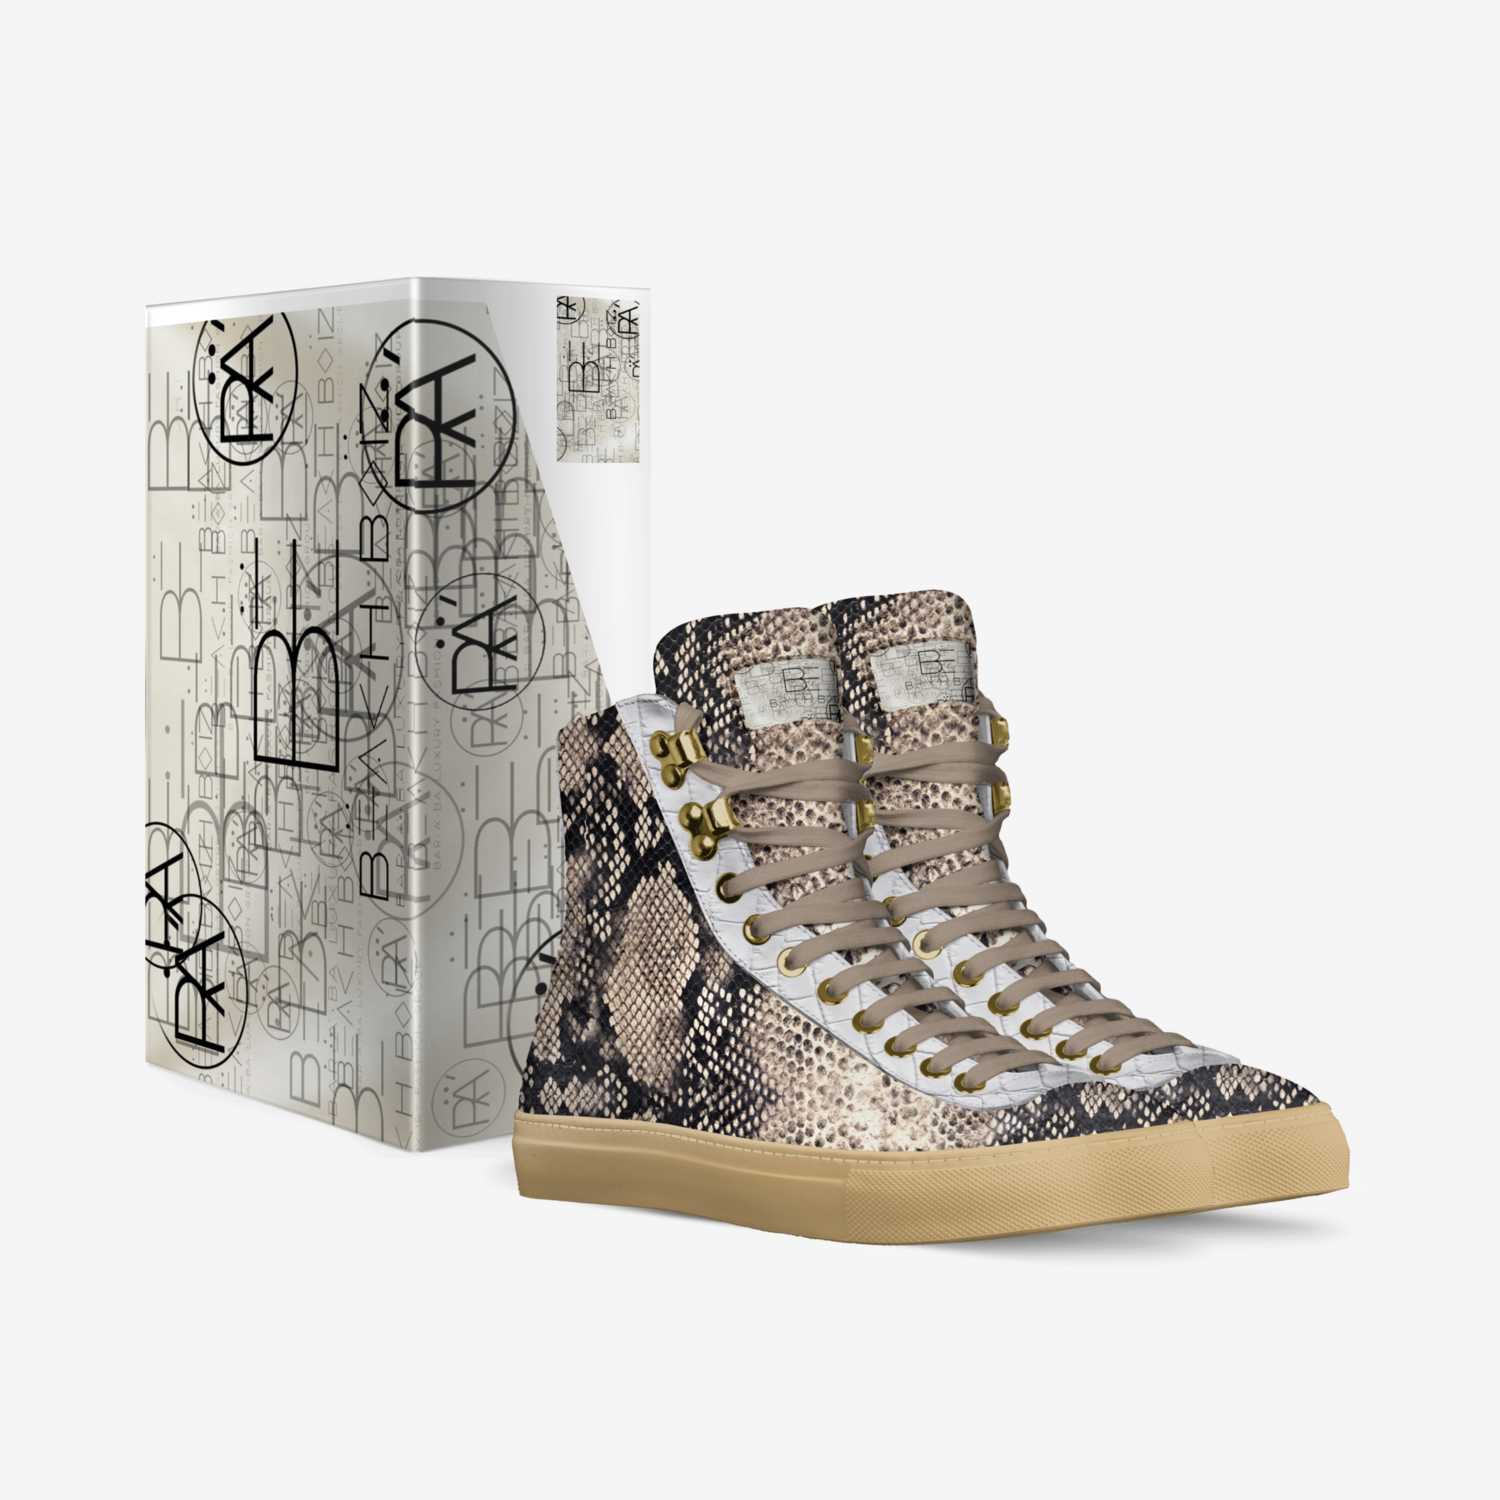 Sand Storm 1 custom made in Italy shoes by Jay Davinci | Box view